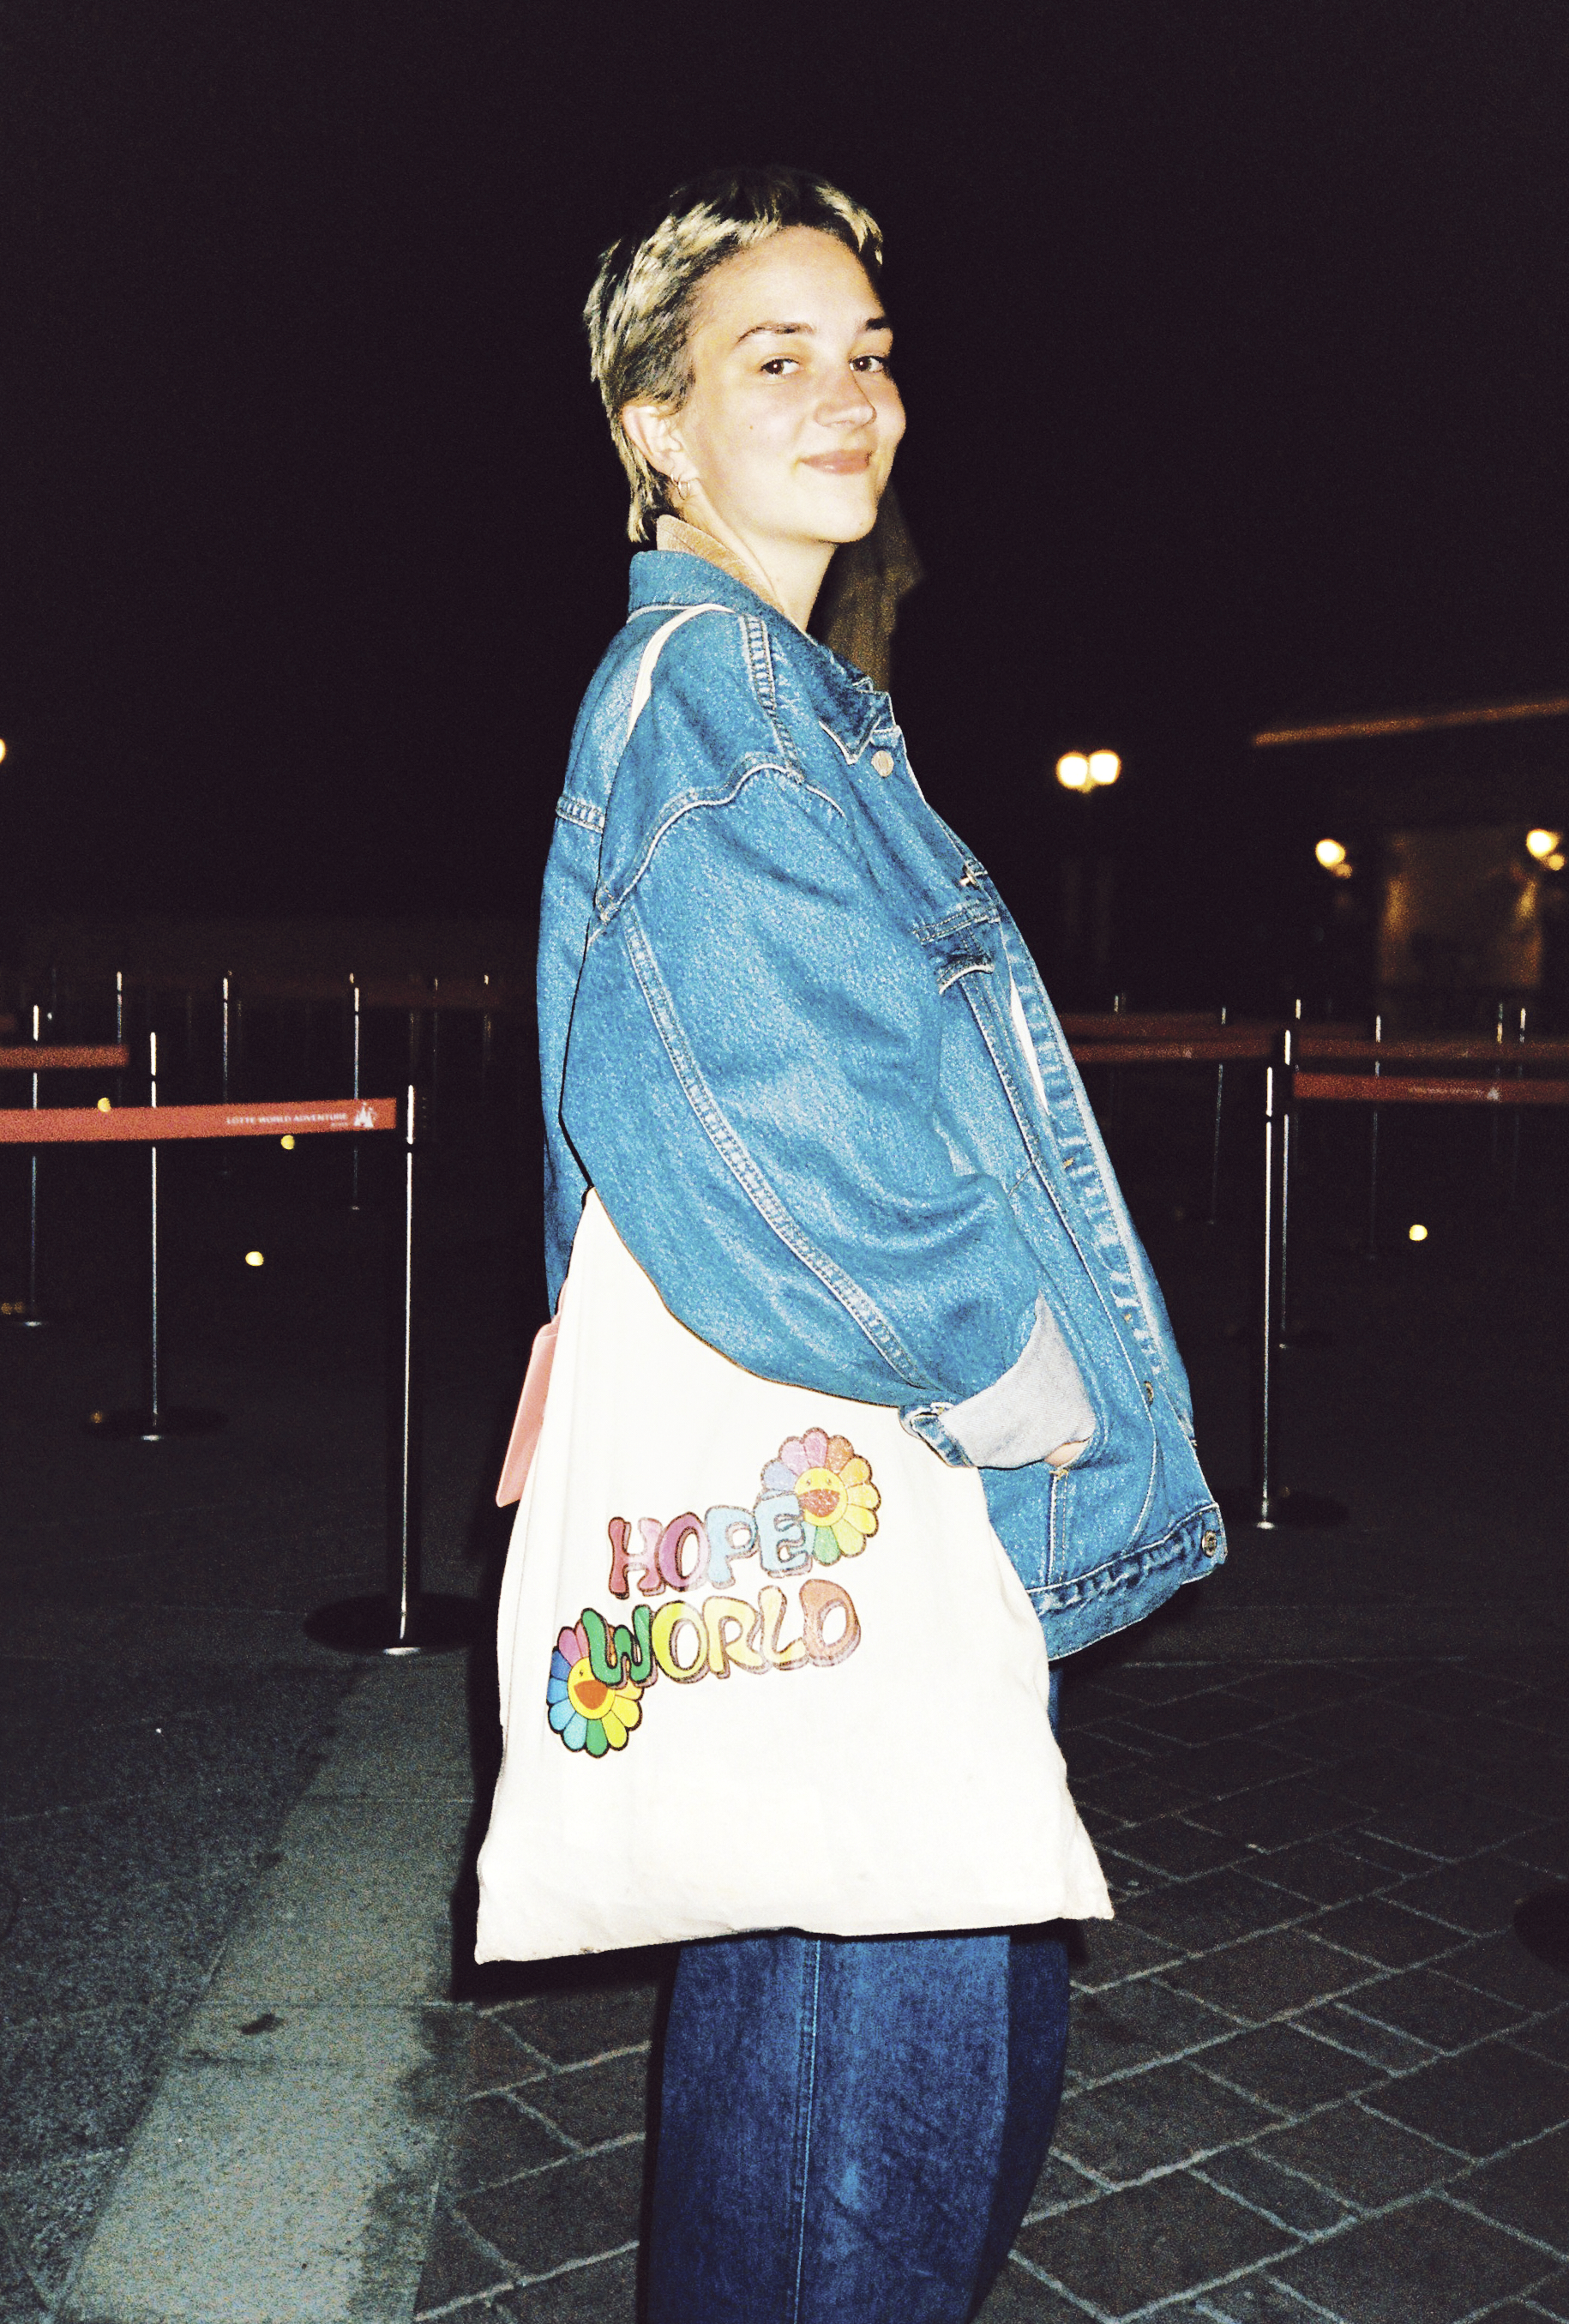 a fan with short bleached hair dressed in all denim looks over their shoulder